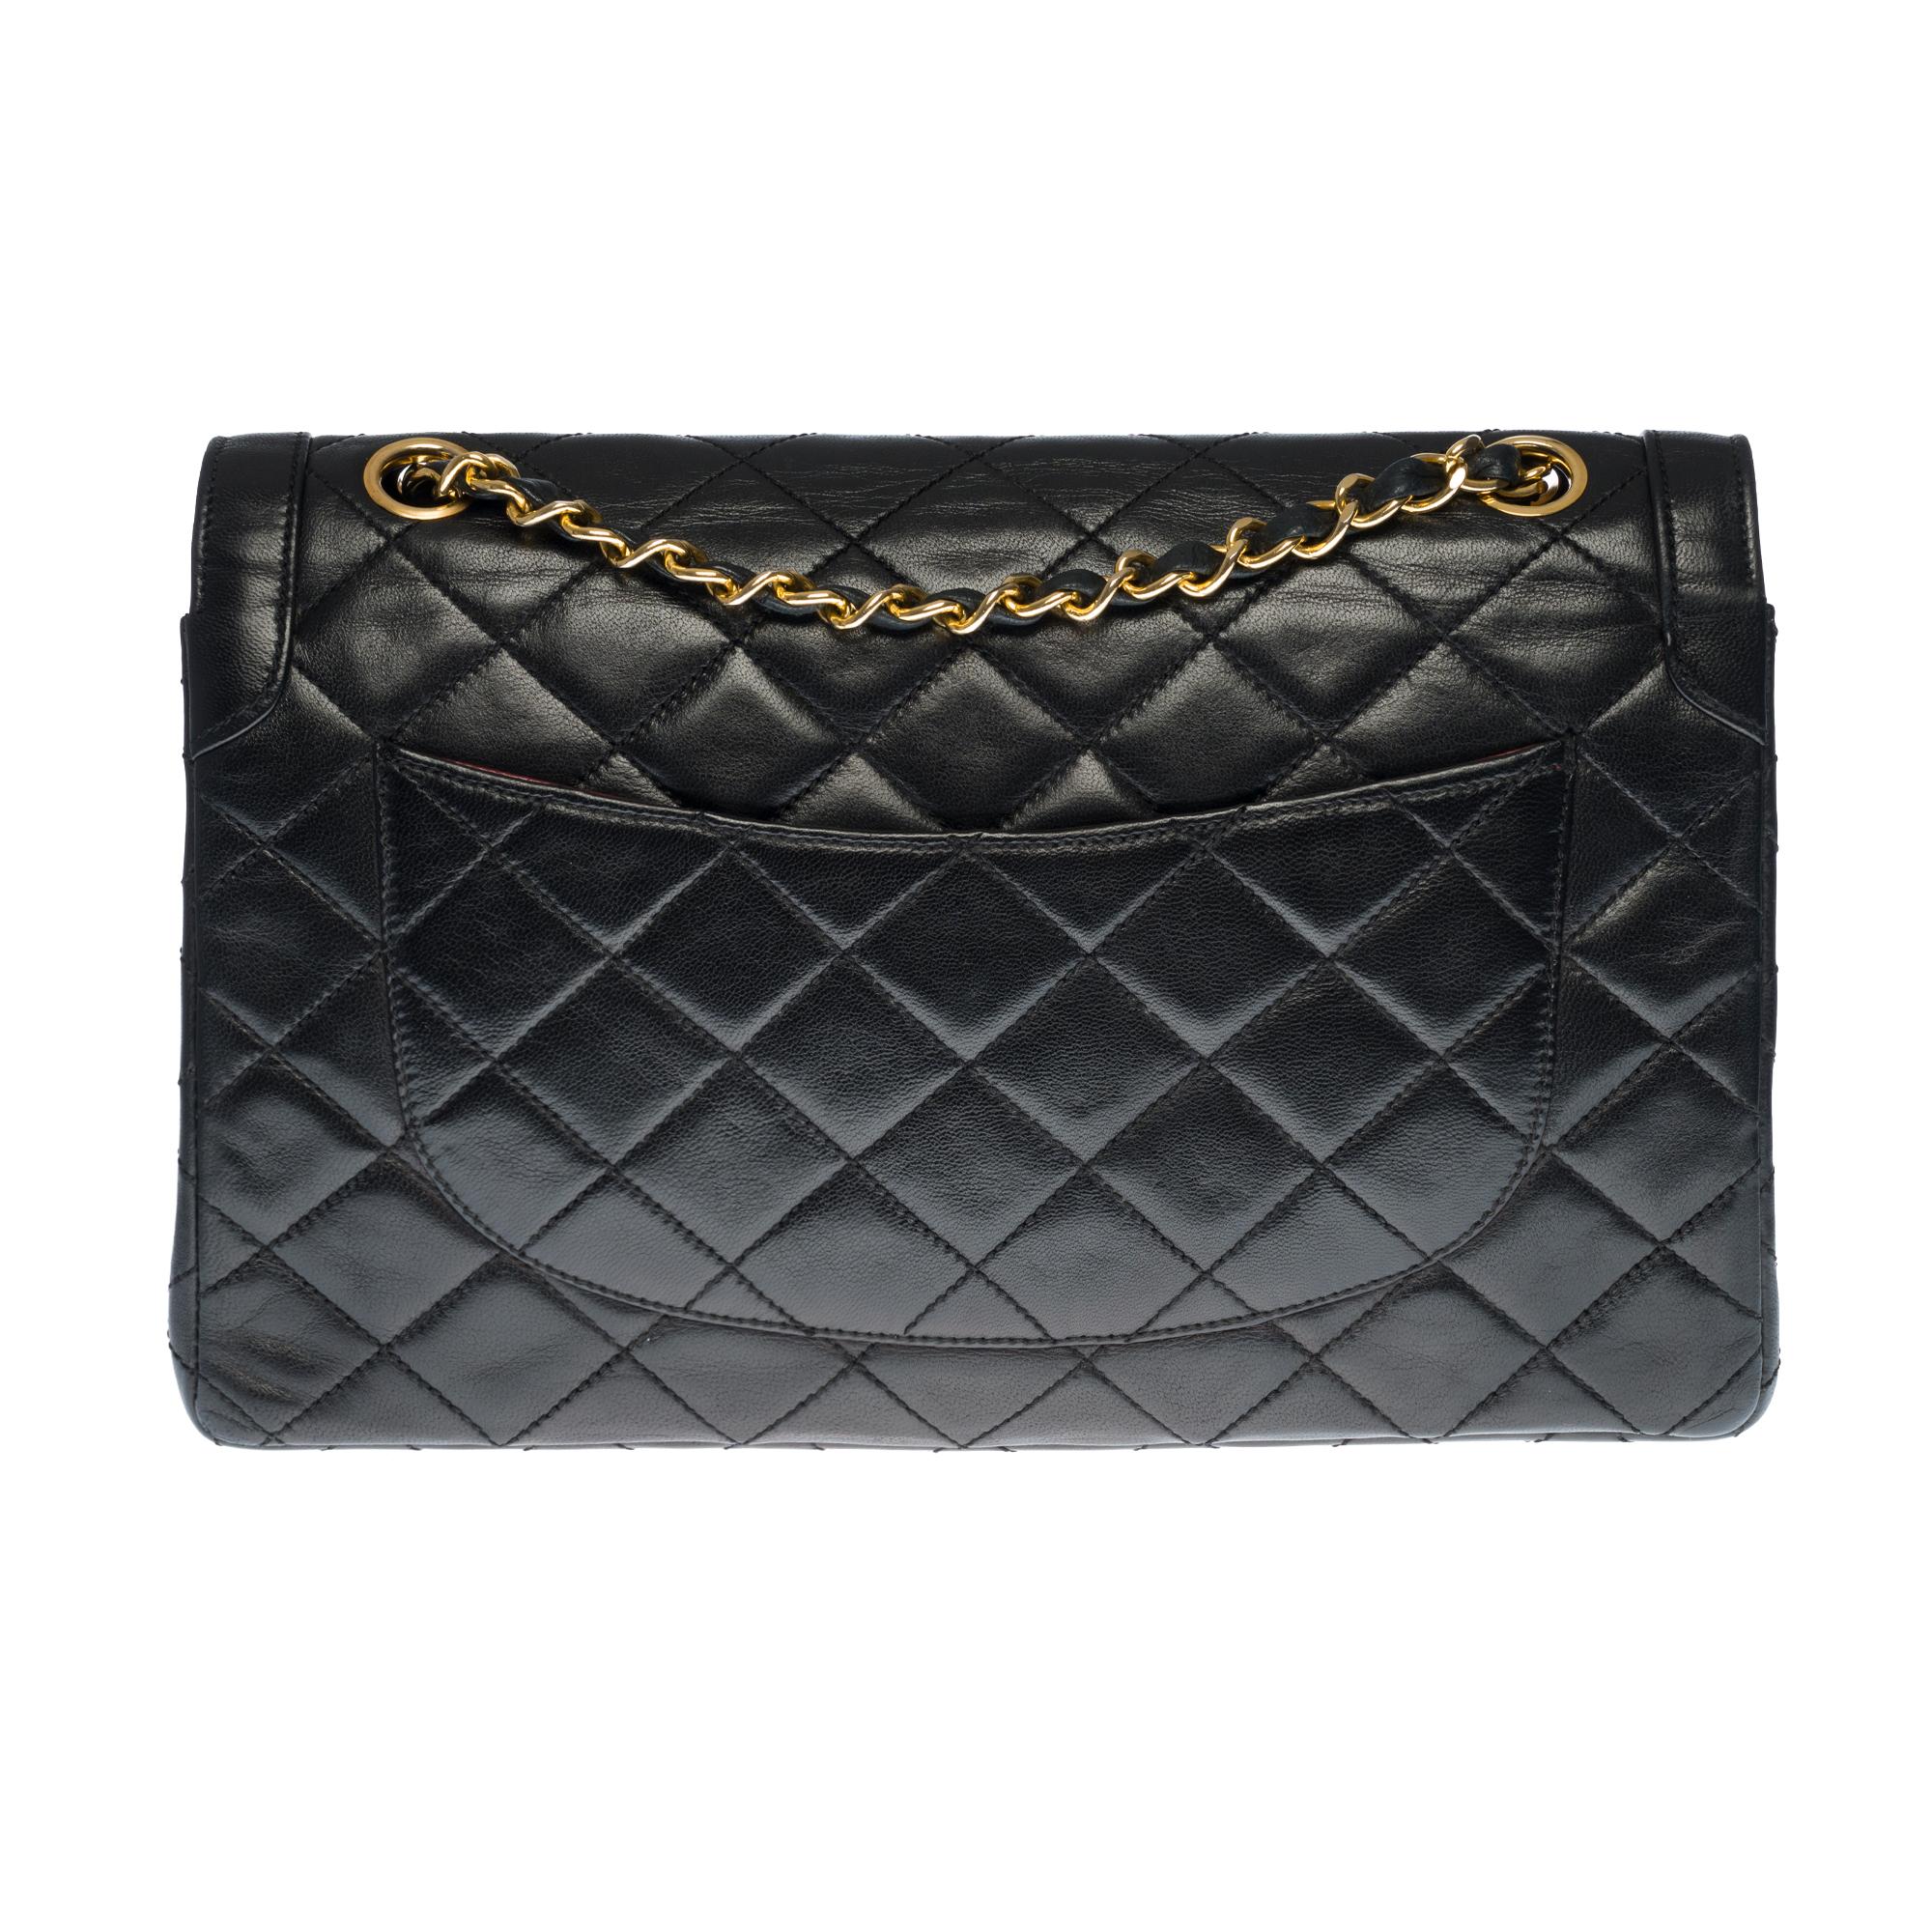 Beautiful Chanel Timeless/Classique handbag with double flap in black quilted leather, gold metal trim, a chain handle in gold metal intertwined with black leather allowing a hand or shoulder support.

Two-tone gold/silver metal flap closure..
Patch